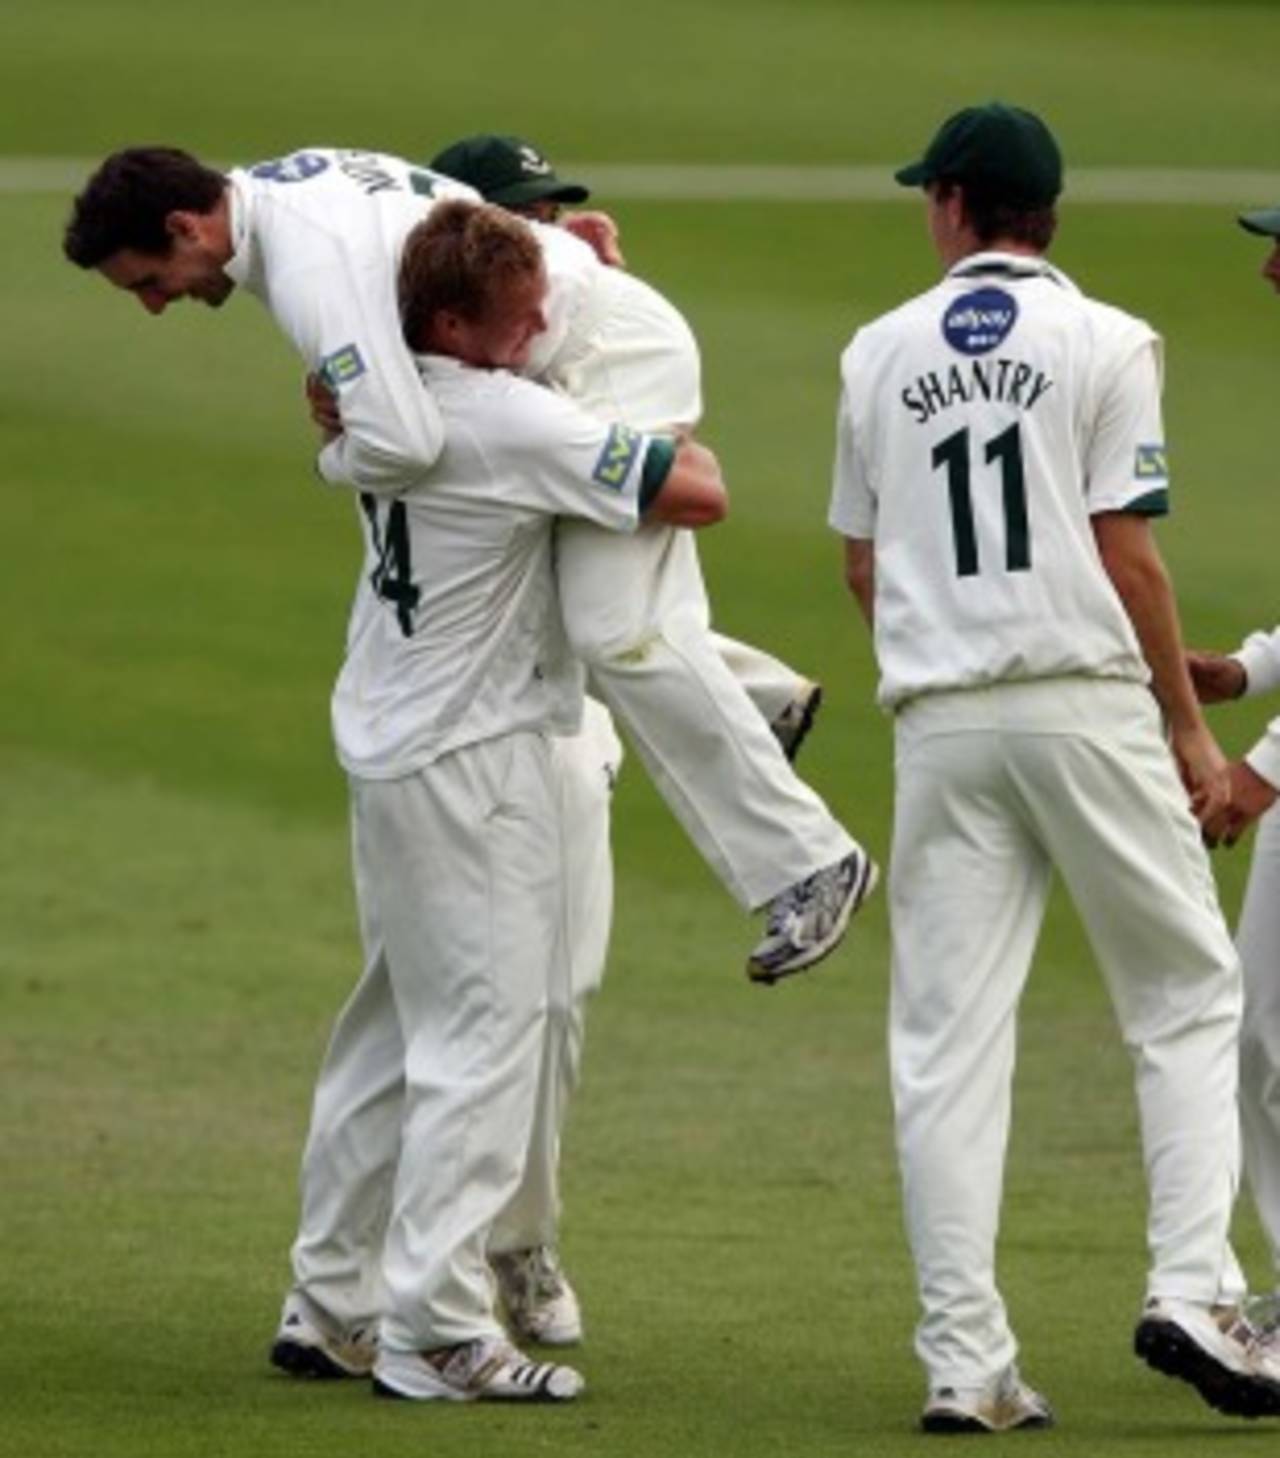 Gareth Andrew lifts up Daryl Mitchell as they celebrate Rory Hamilton-Brown's dismissal, Worcestershire v Surrey, County Championship, Division Two, New Road, August 17, 2010